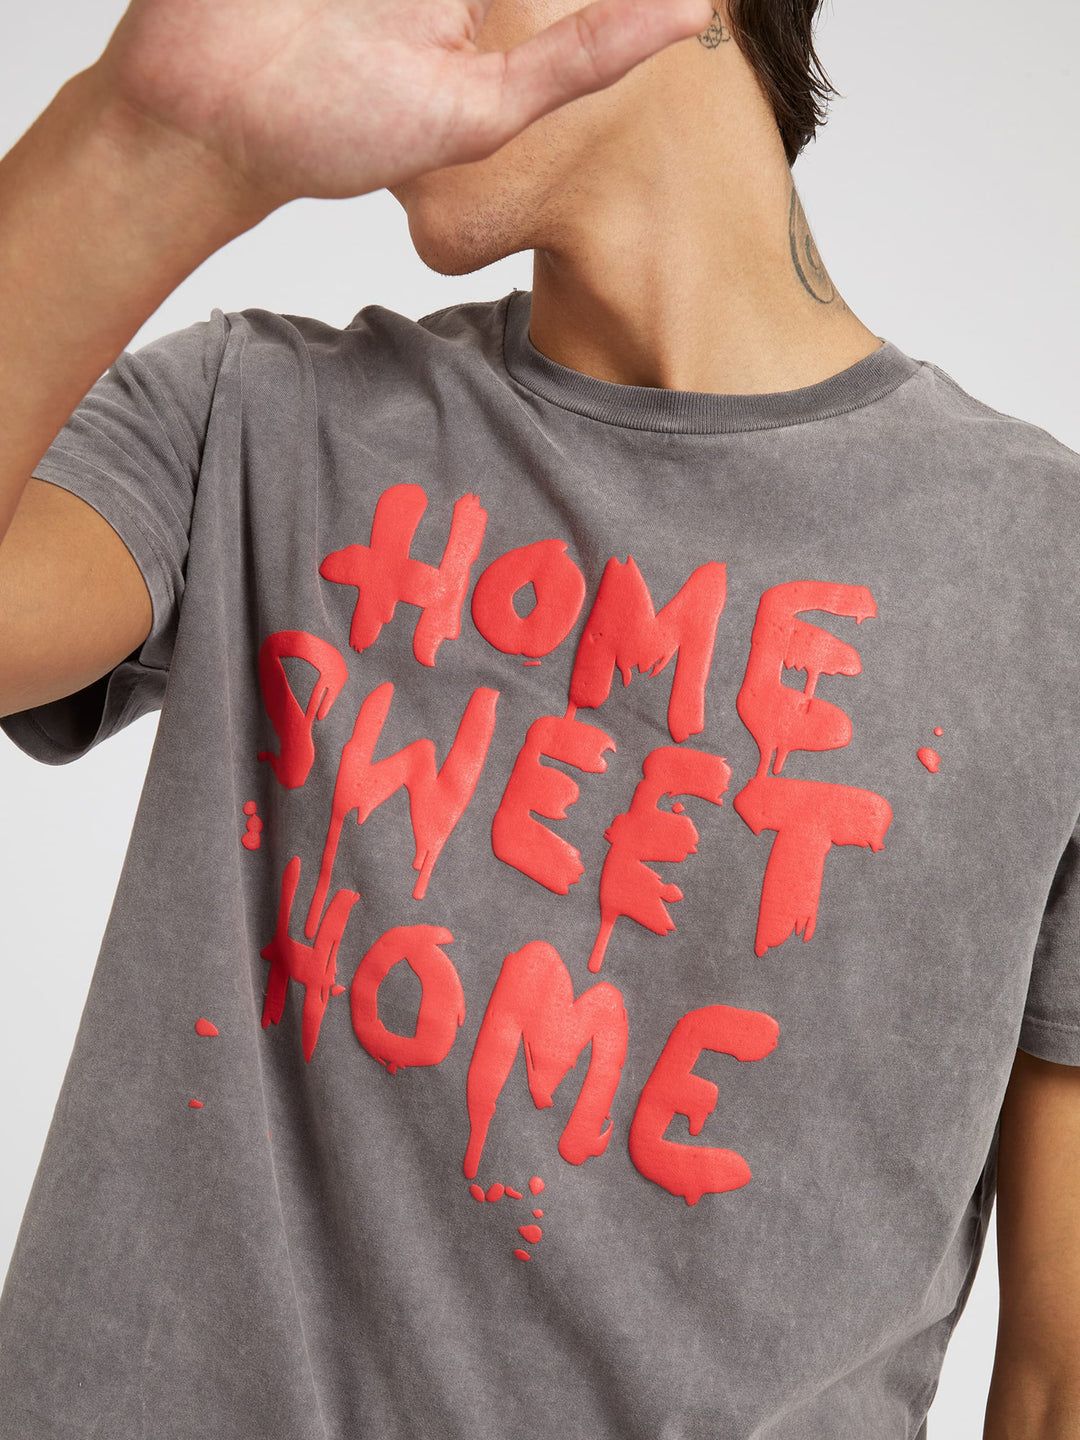 GUESS x BRANDALISED GRAFFITI BY BANKSY SS HOME SWEET HOME TEE - Guess